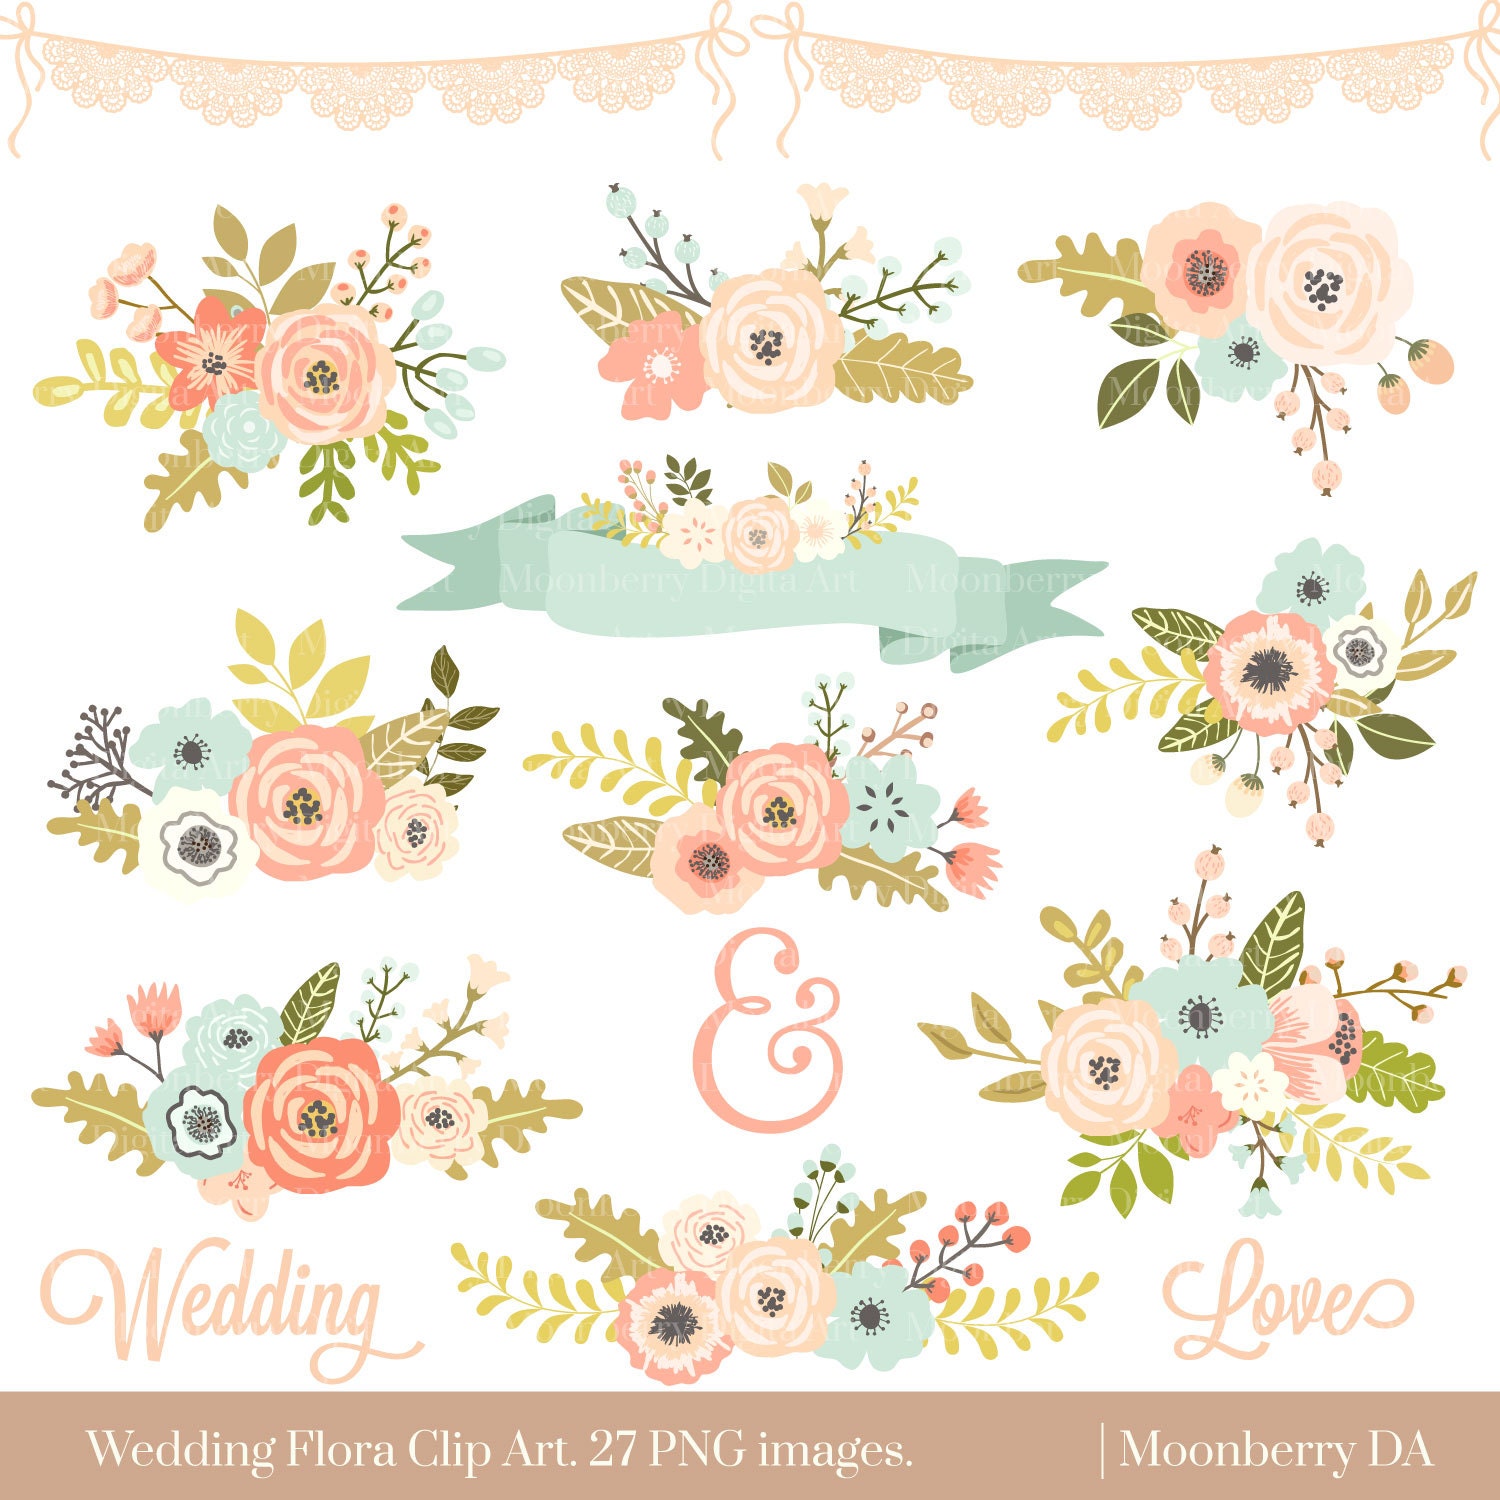 floral wedding clipart free download - photo #27